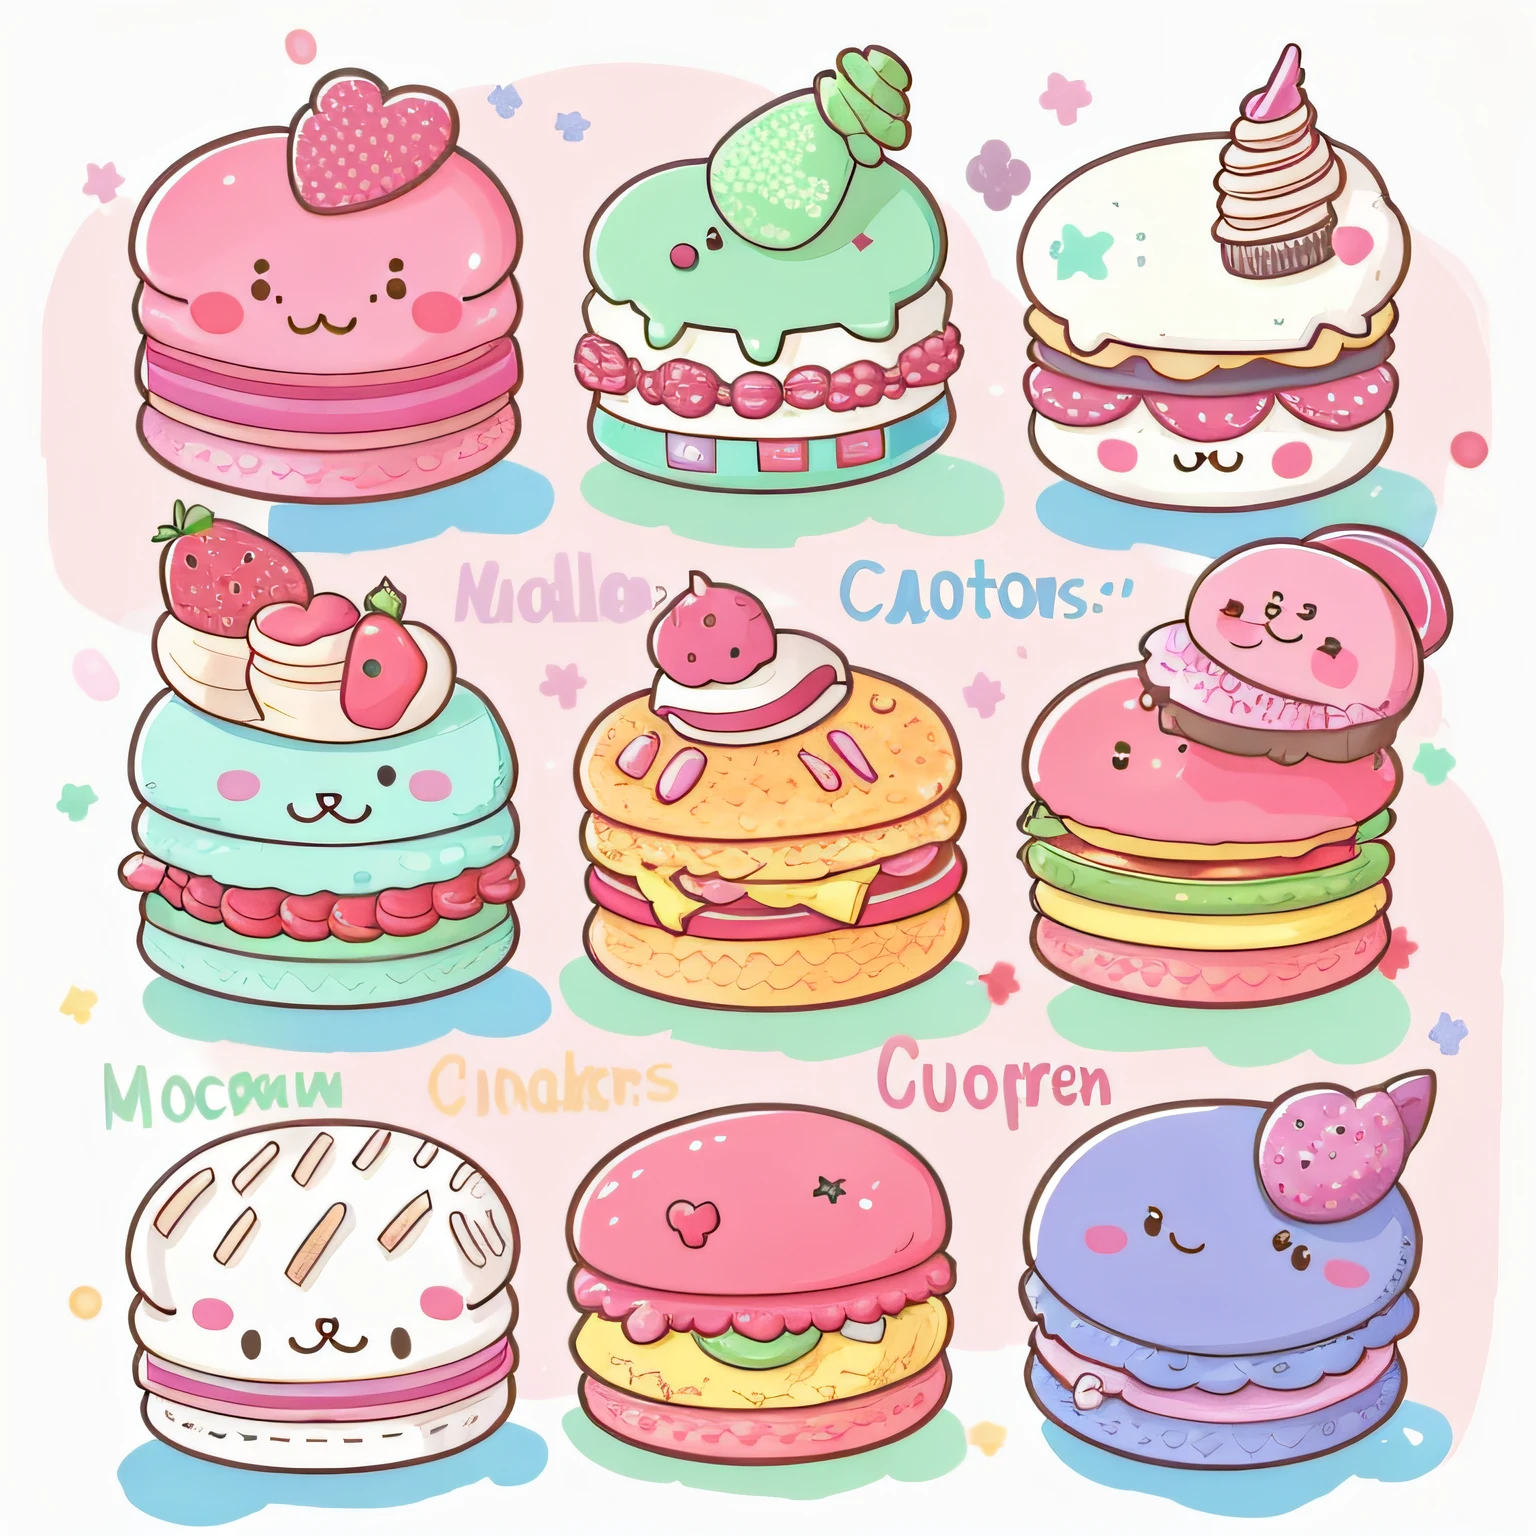 Close-up of a pile of cakes with different toppings, cute colorful adorable, eating a cake, Confectionery, macaron, Kawaii colors, Cupcakes, cute artwork, kawaii, pastel cute slime, Japanese kawaii style, decora inspired illustrations, cute faces, patisserie, kawaii aesthetic, cutecore, Cute characters, lovely art style, pastel', patisserie, cute illustration